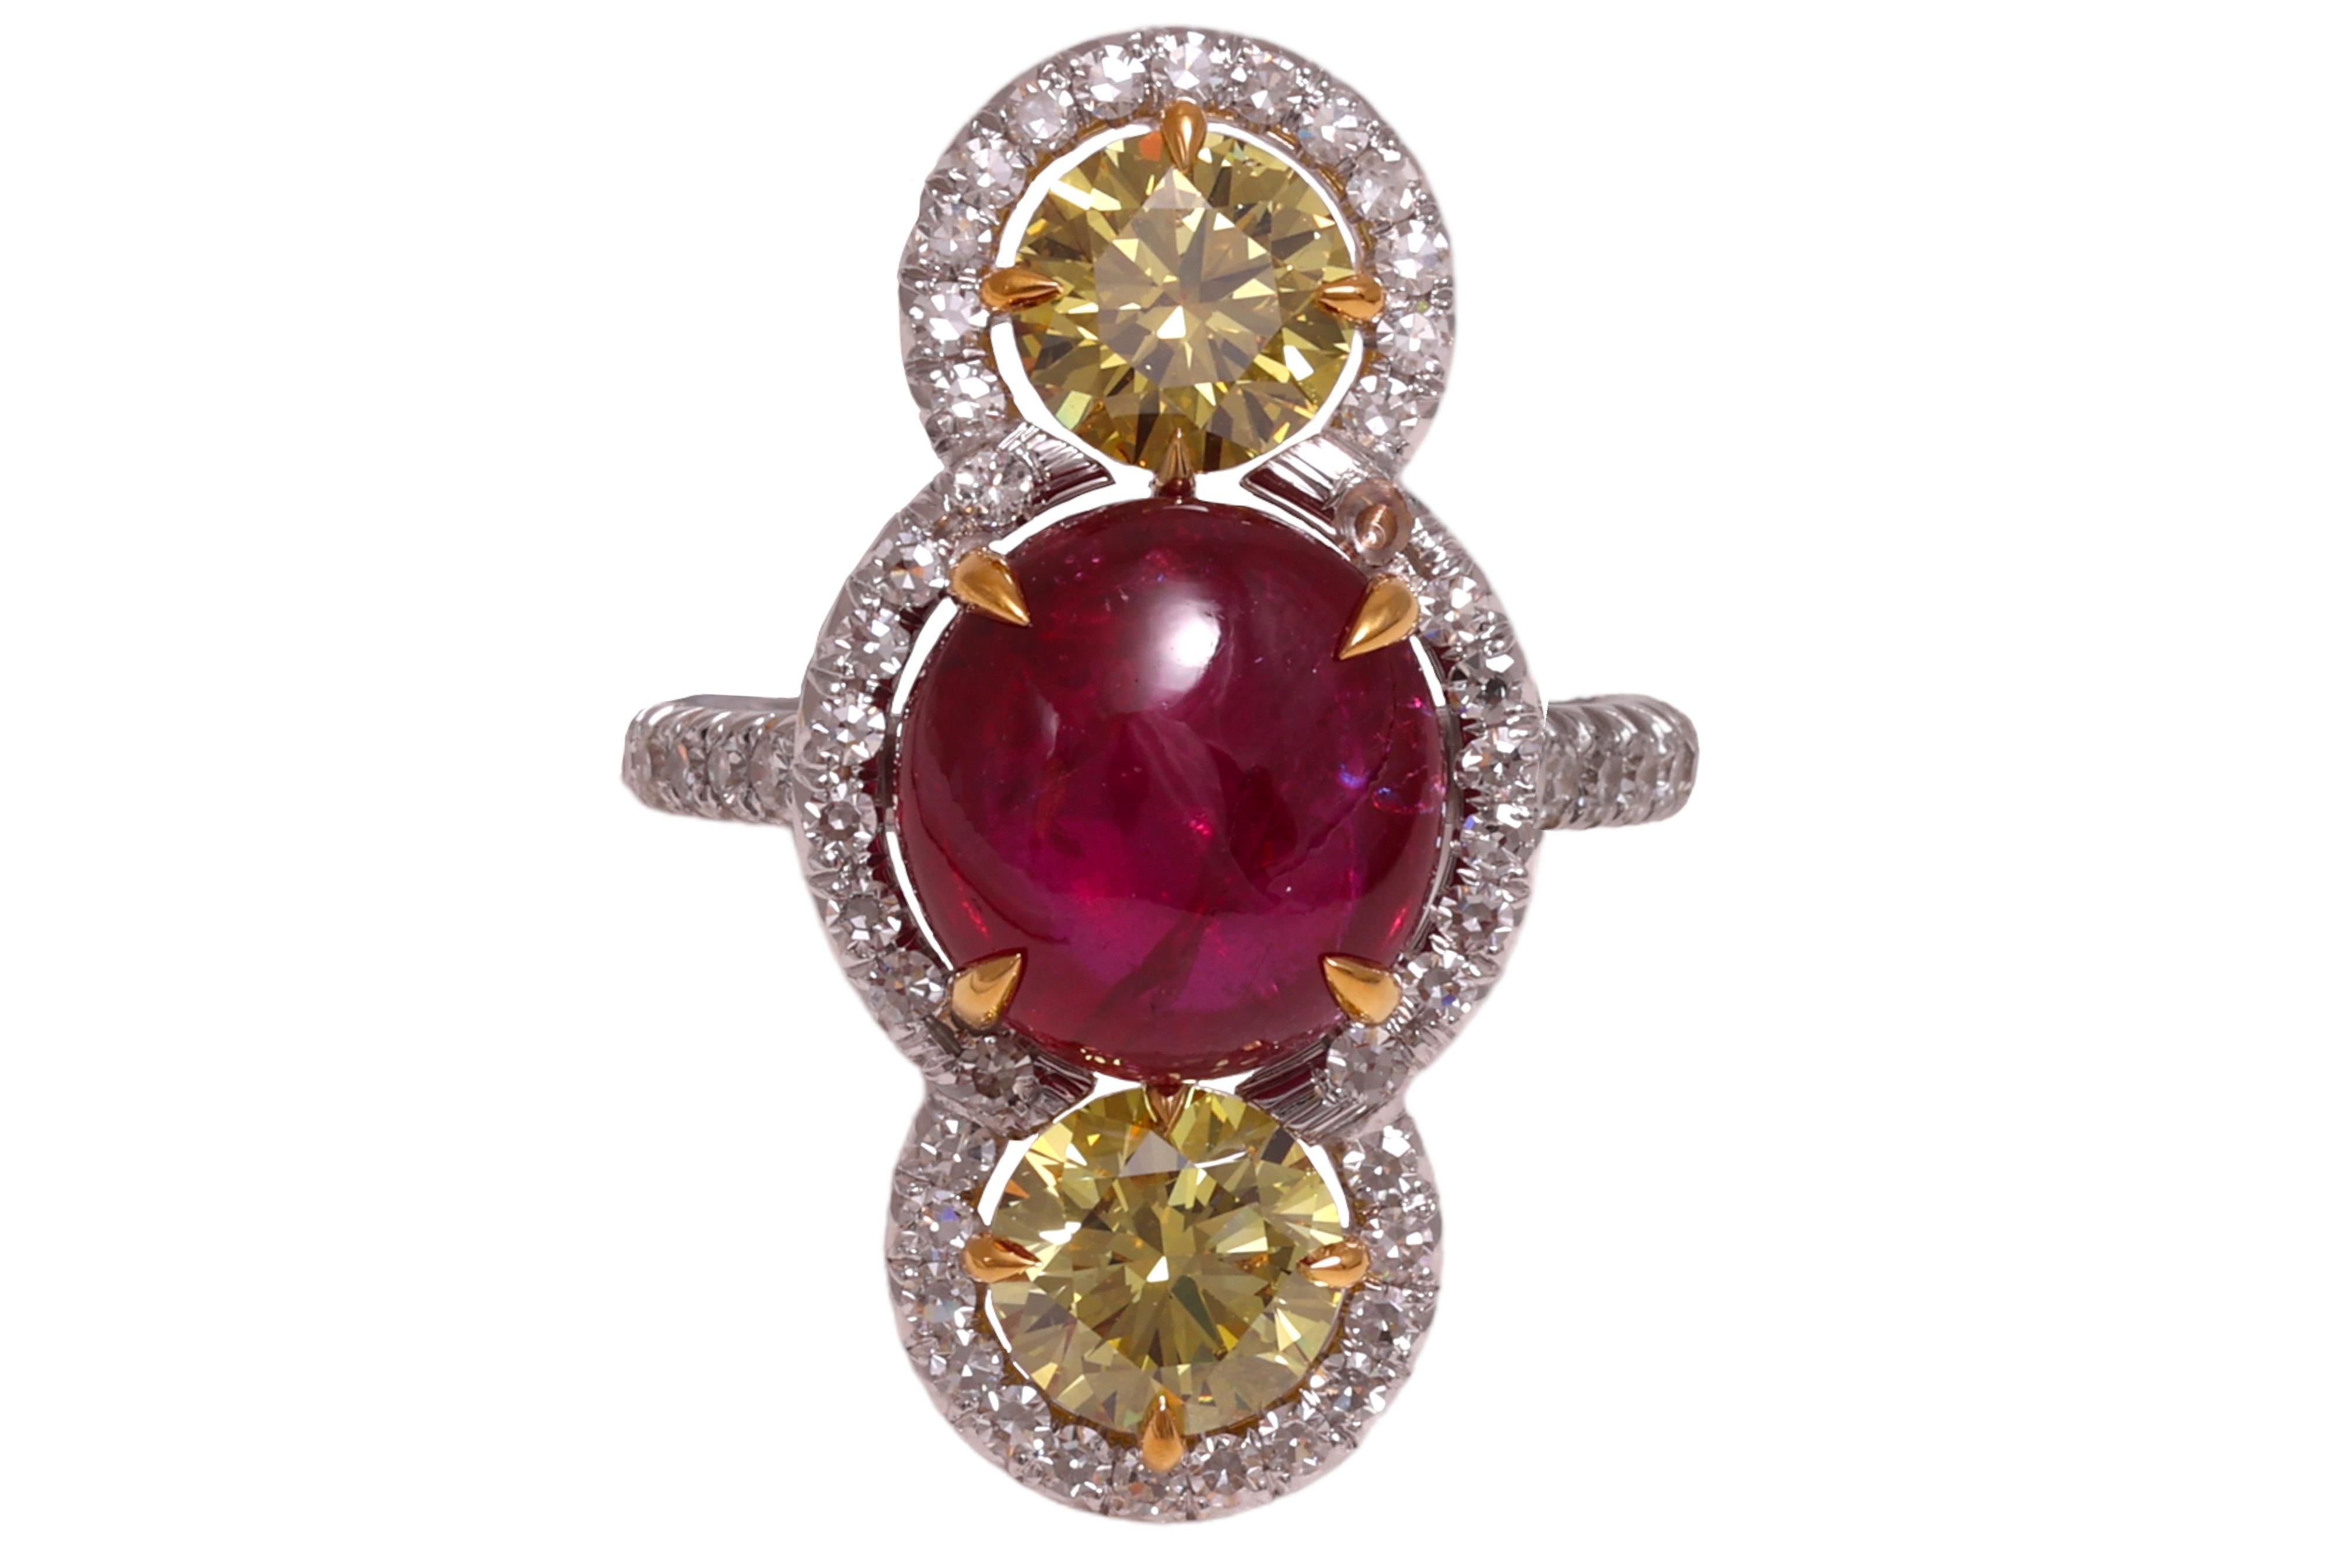 Magnificant 18 Kt. Gold No Heat Burmese Ruby Cabochon & Intense Fancy Diamonds Ring

Ruby: Red, Cabochon cut, natural corundum, No heat Burmese Ruby 6.15 ct , Looks like Pigeon Blood !
With Gubelin Certificate Report number: 15091092

Diamonds: 2